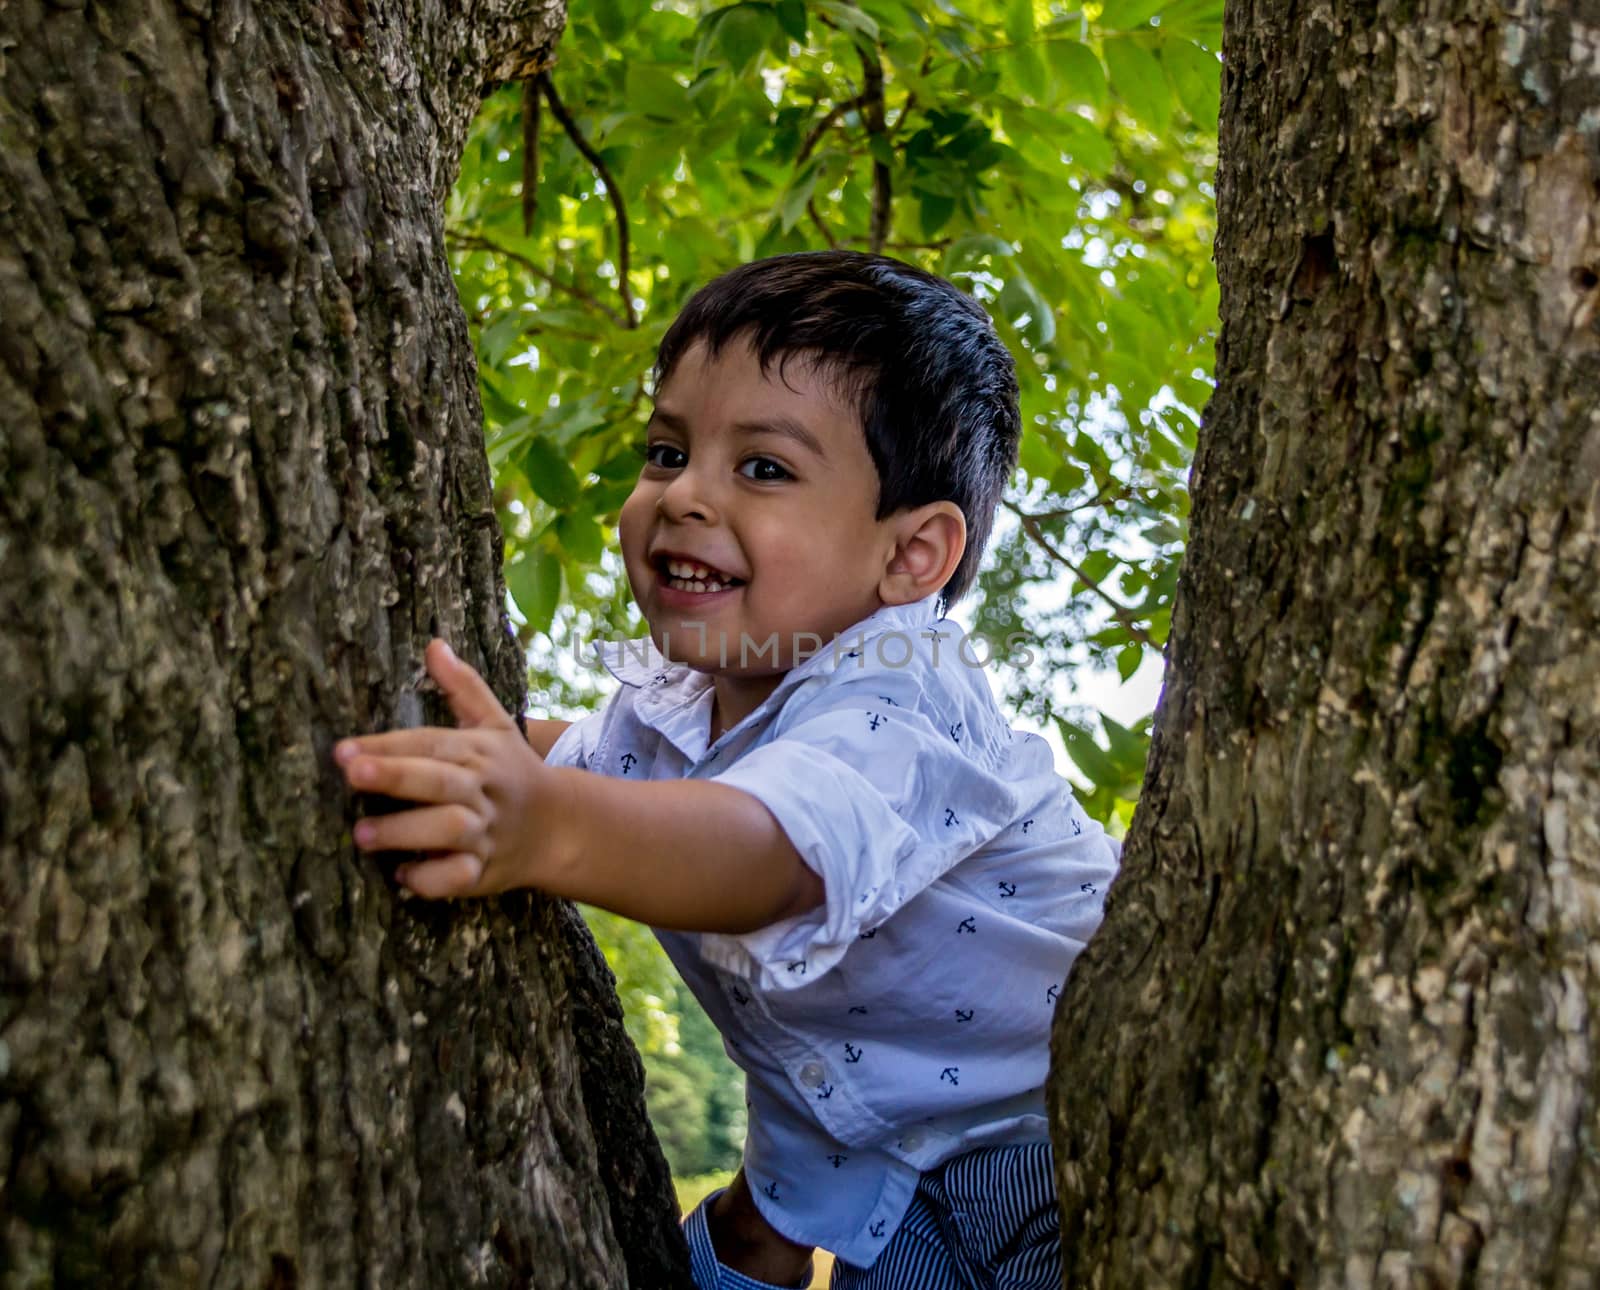 Latino child in a tree by Toro_the_Bull